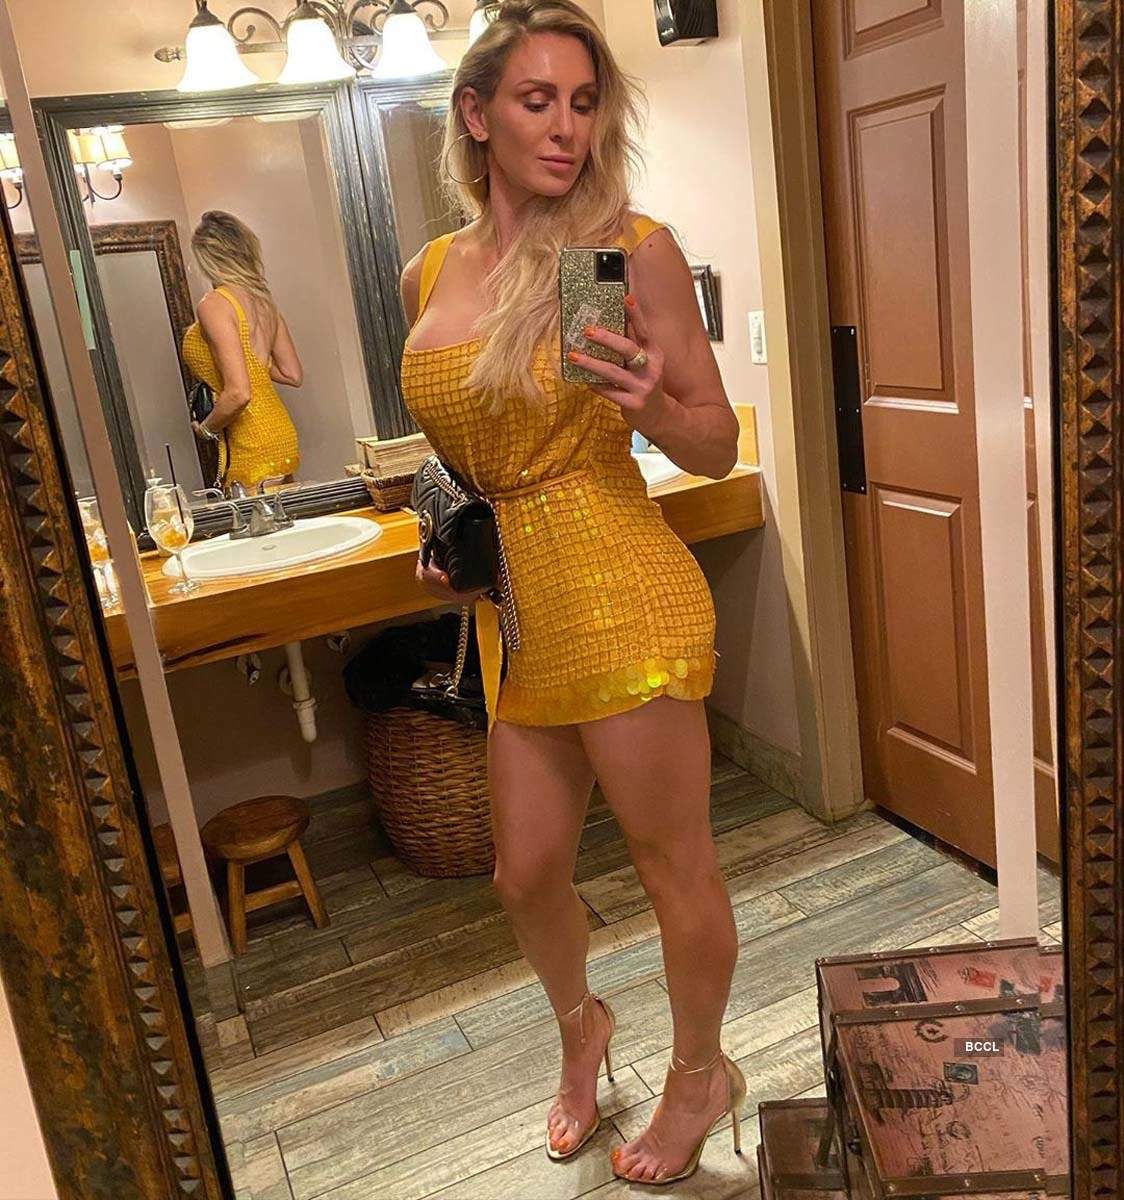 Unmissable pictures of gorgeous WWE star Charlotte Flair